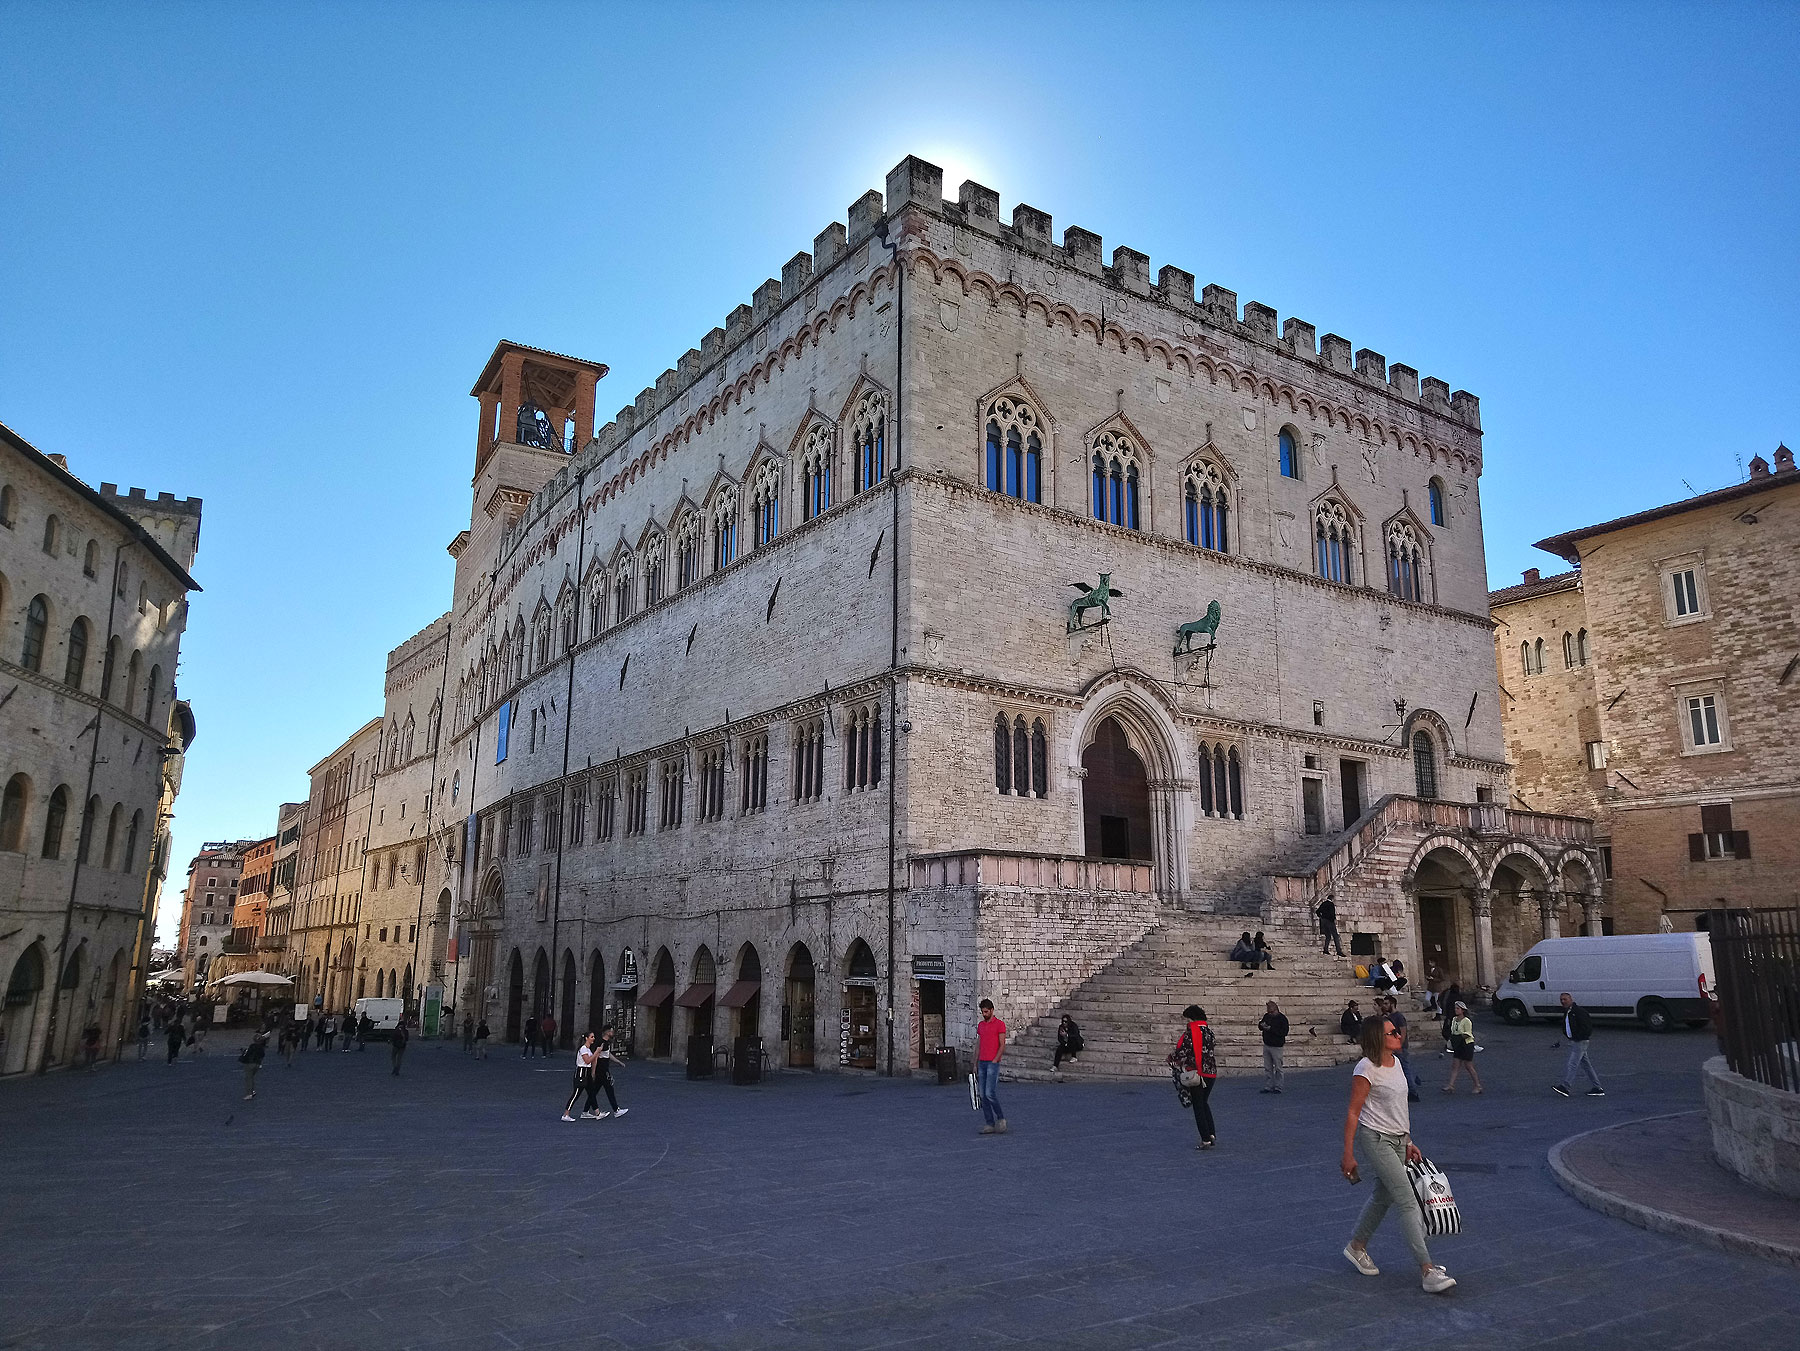 Perugia, National Gallery of Umbria closes for work: will reopen in spring 2022